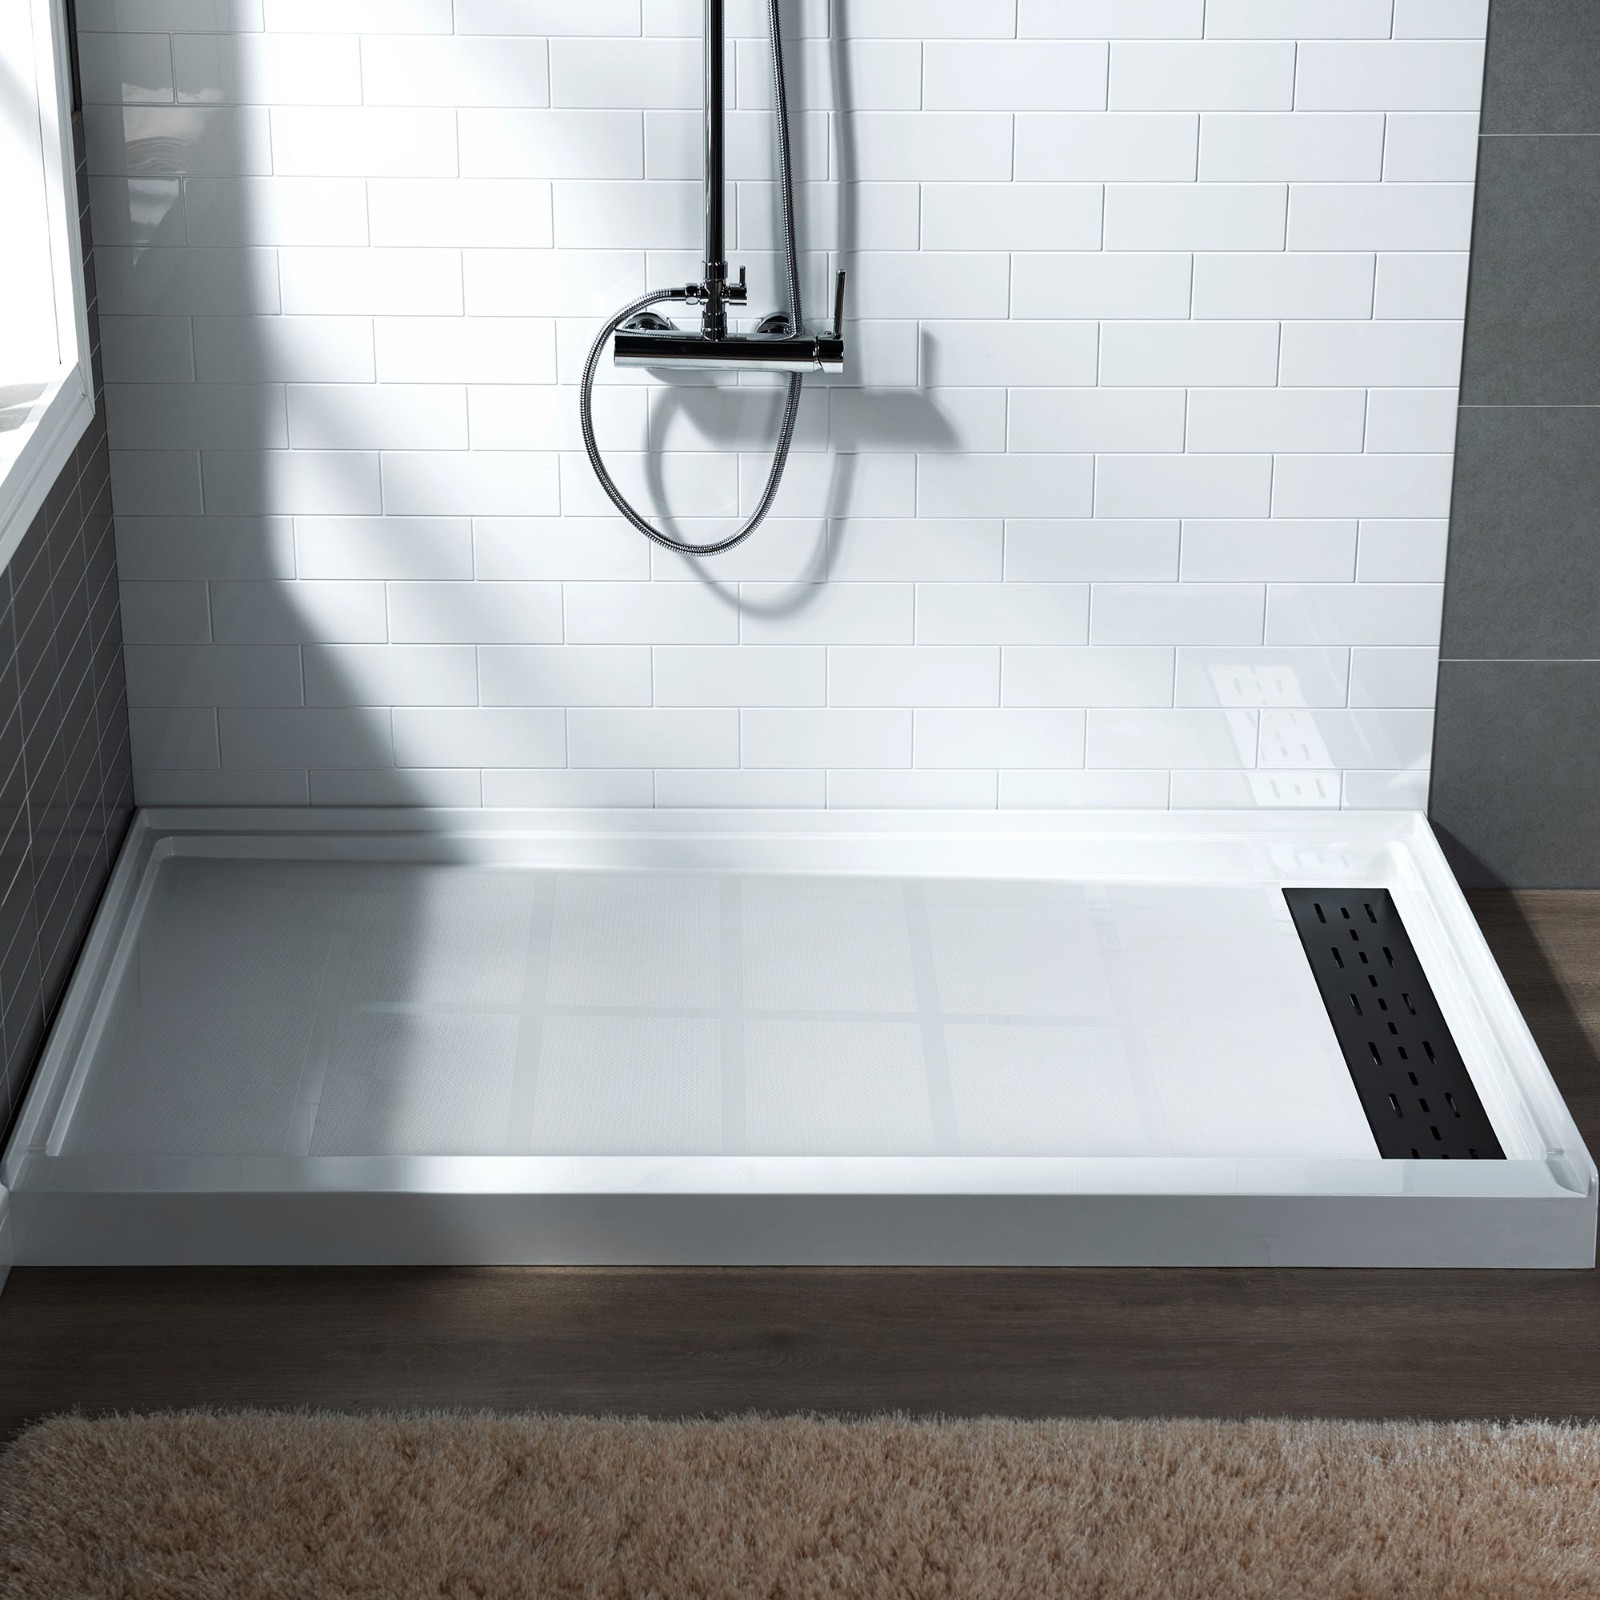  WOODBRIDGE SBR4836-1000R-MB SolidSurface Shower Base with Recessed Trench Side Including Matte Black Linear Cover, 48